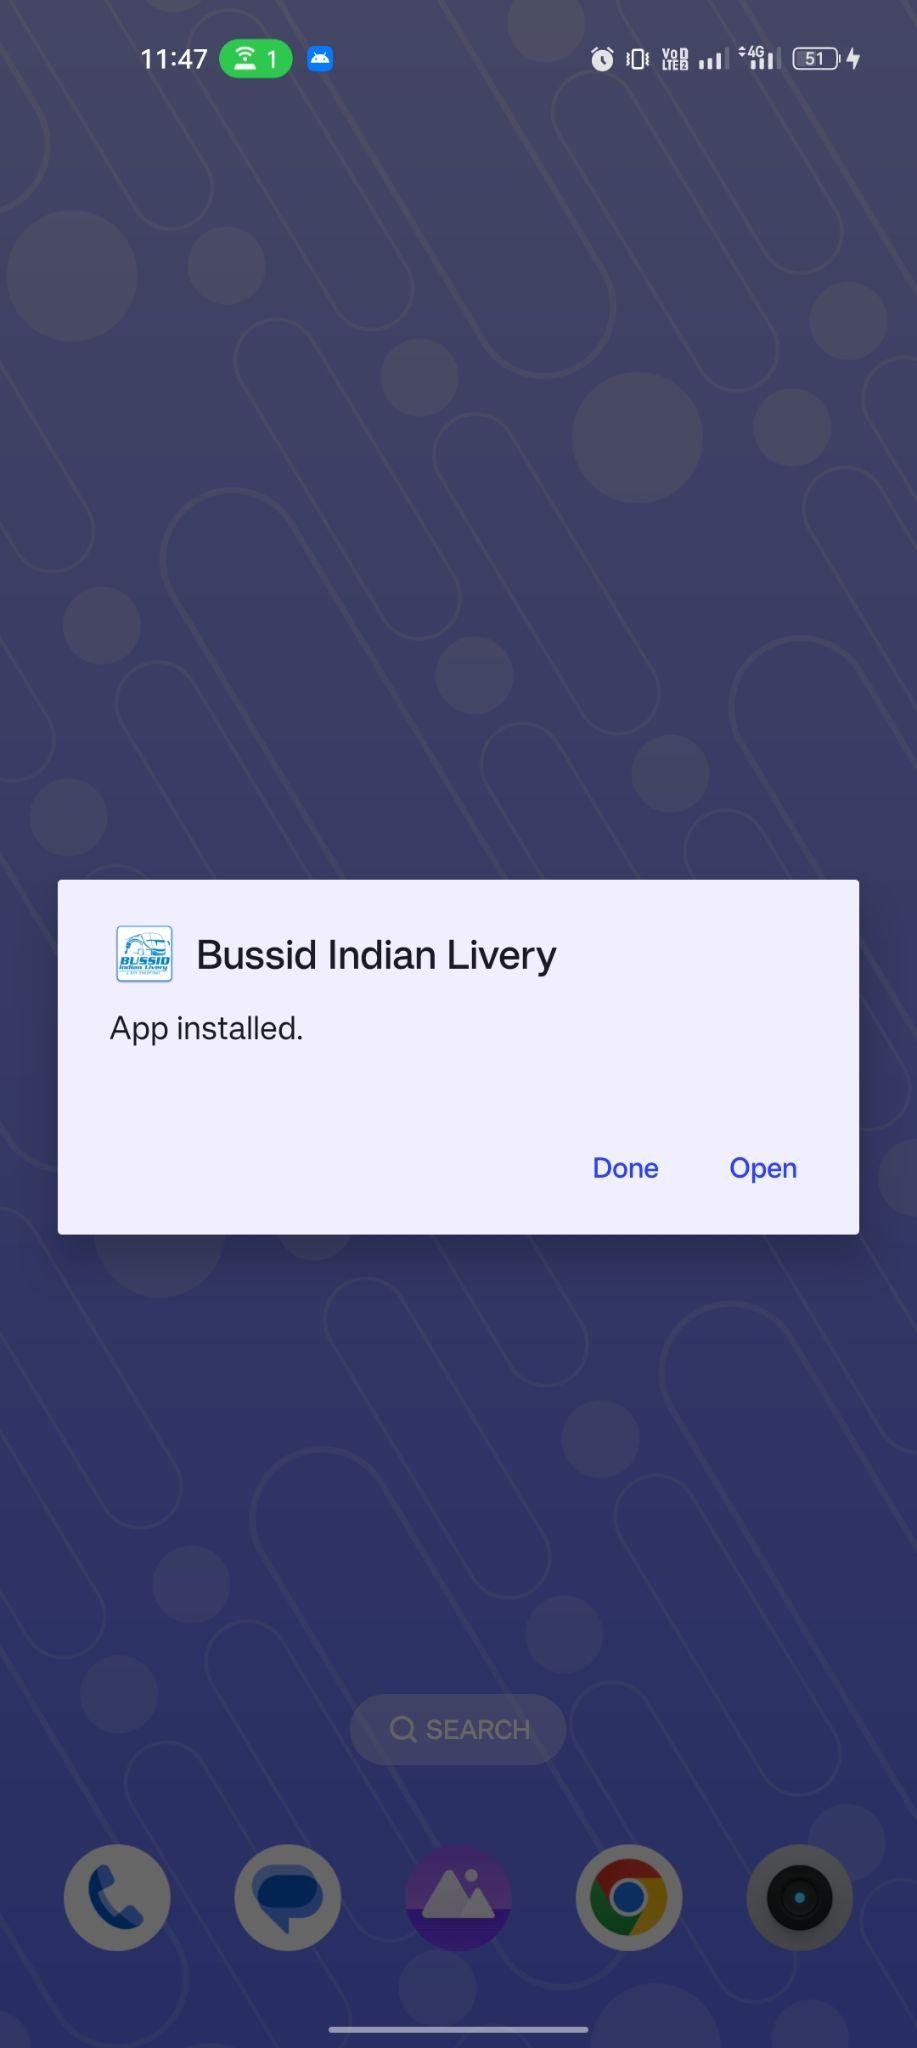 Bussid Indian Livery apk installed